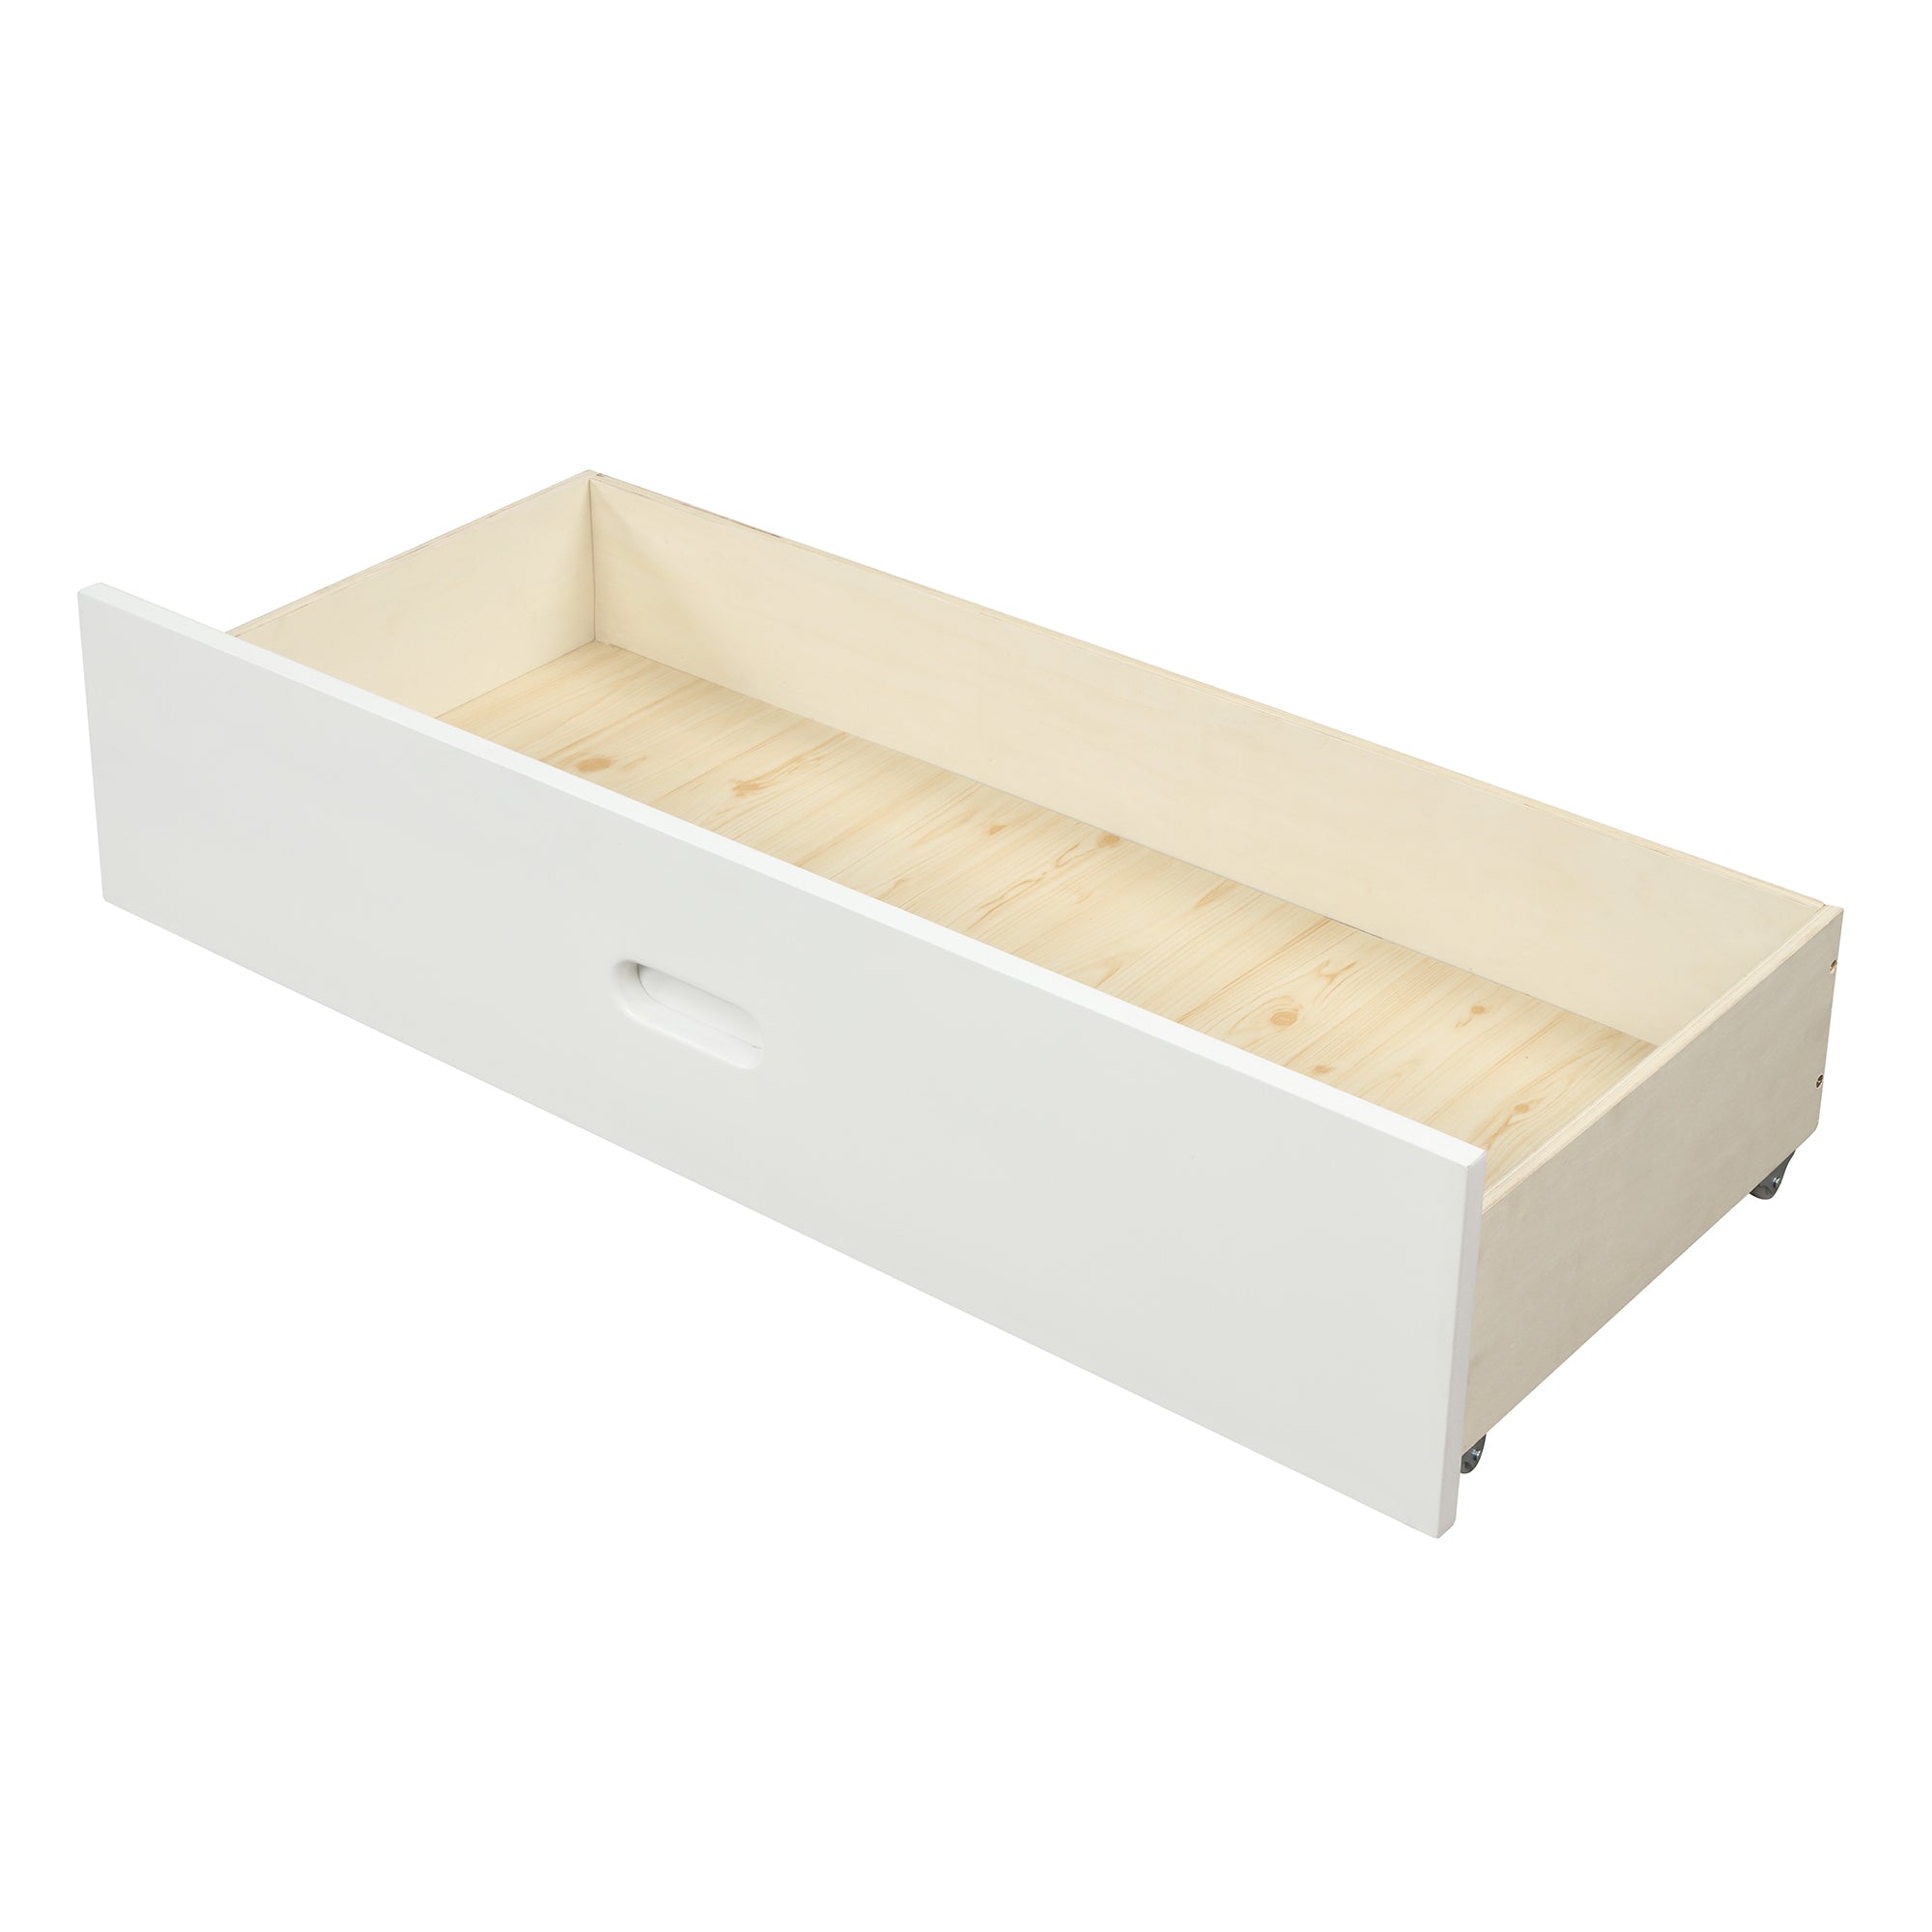 White Full Wood Platform Bed with Two Drawers - Storage Solution, Sturdy Support